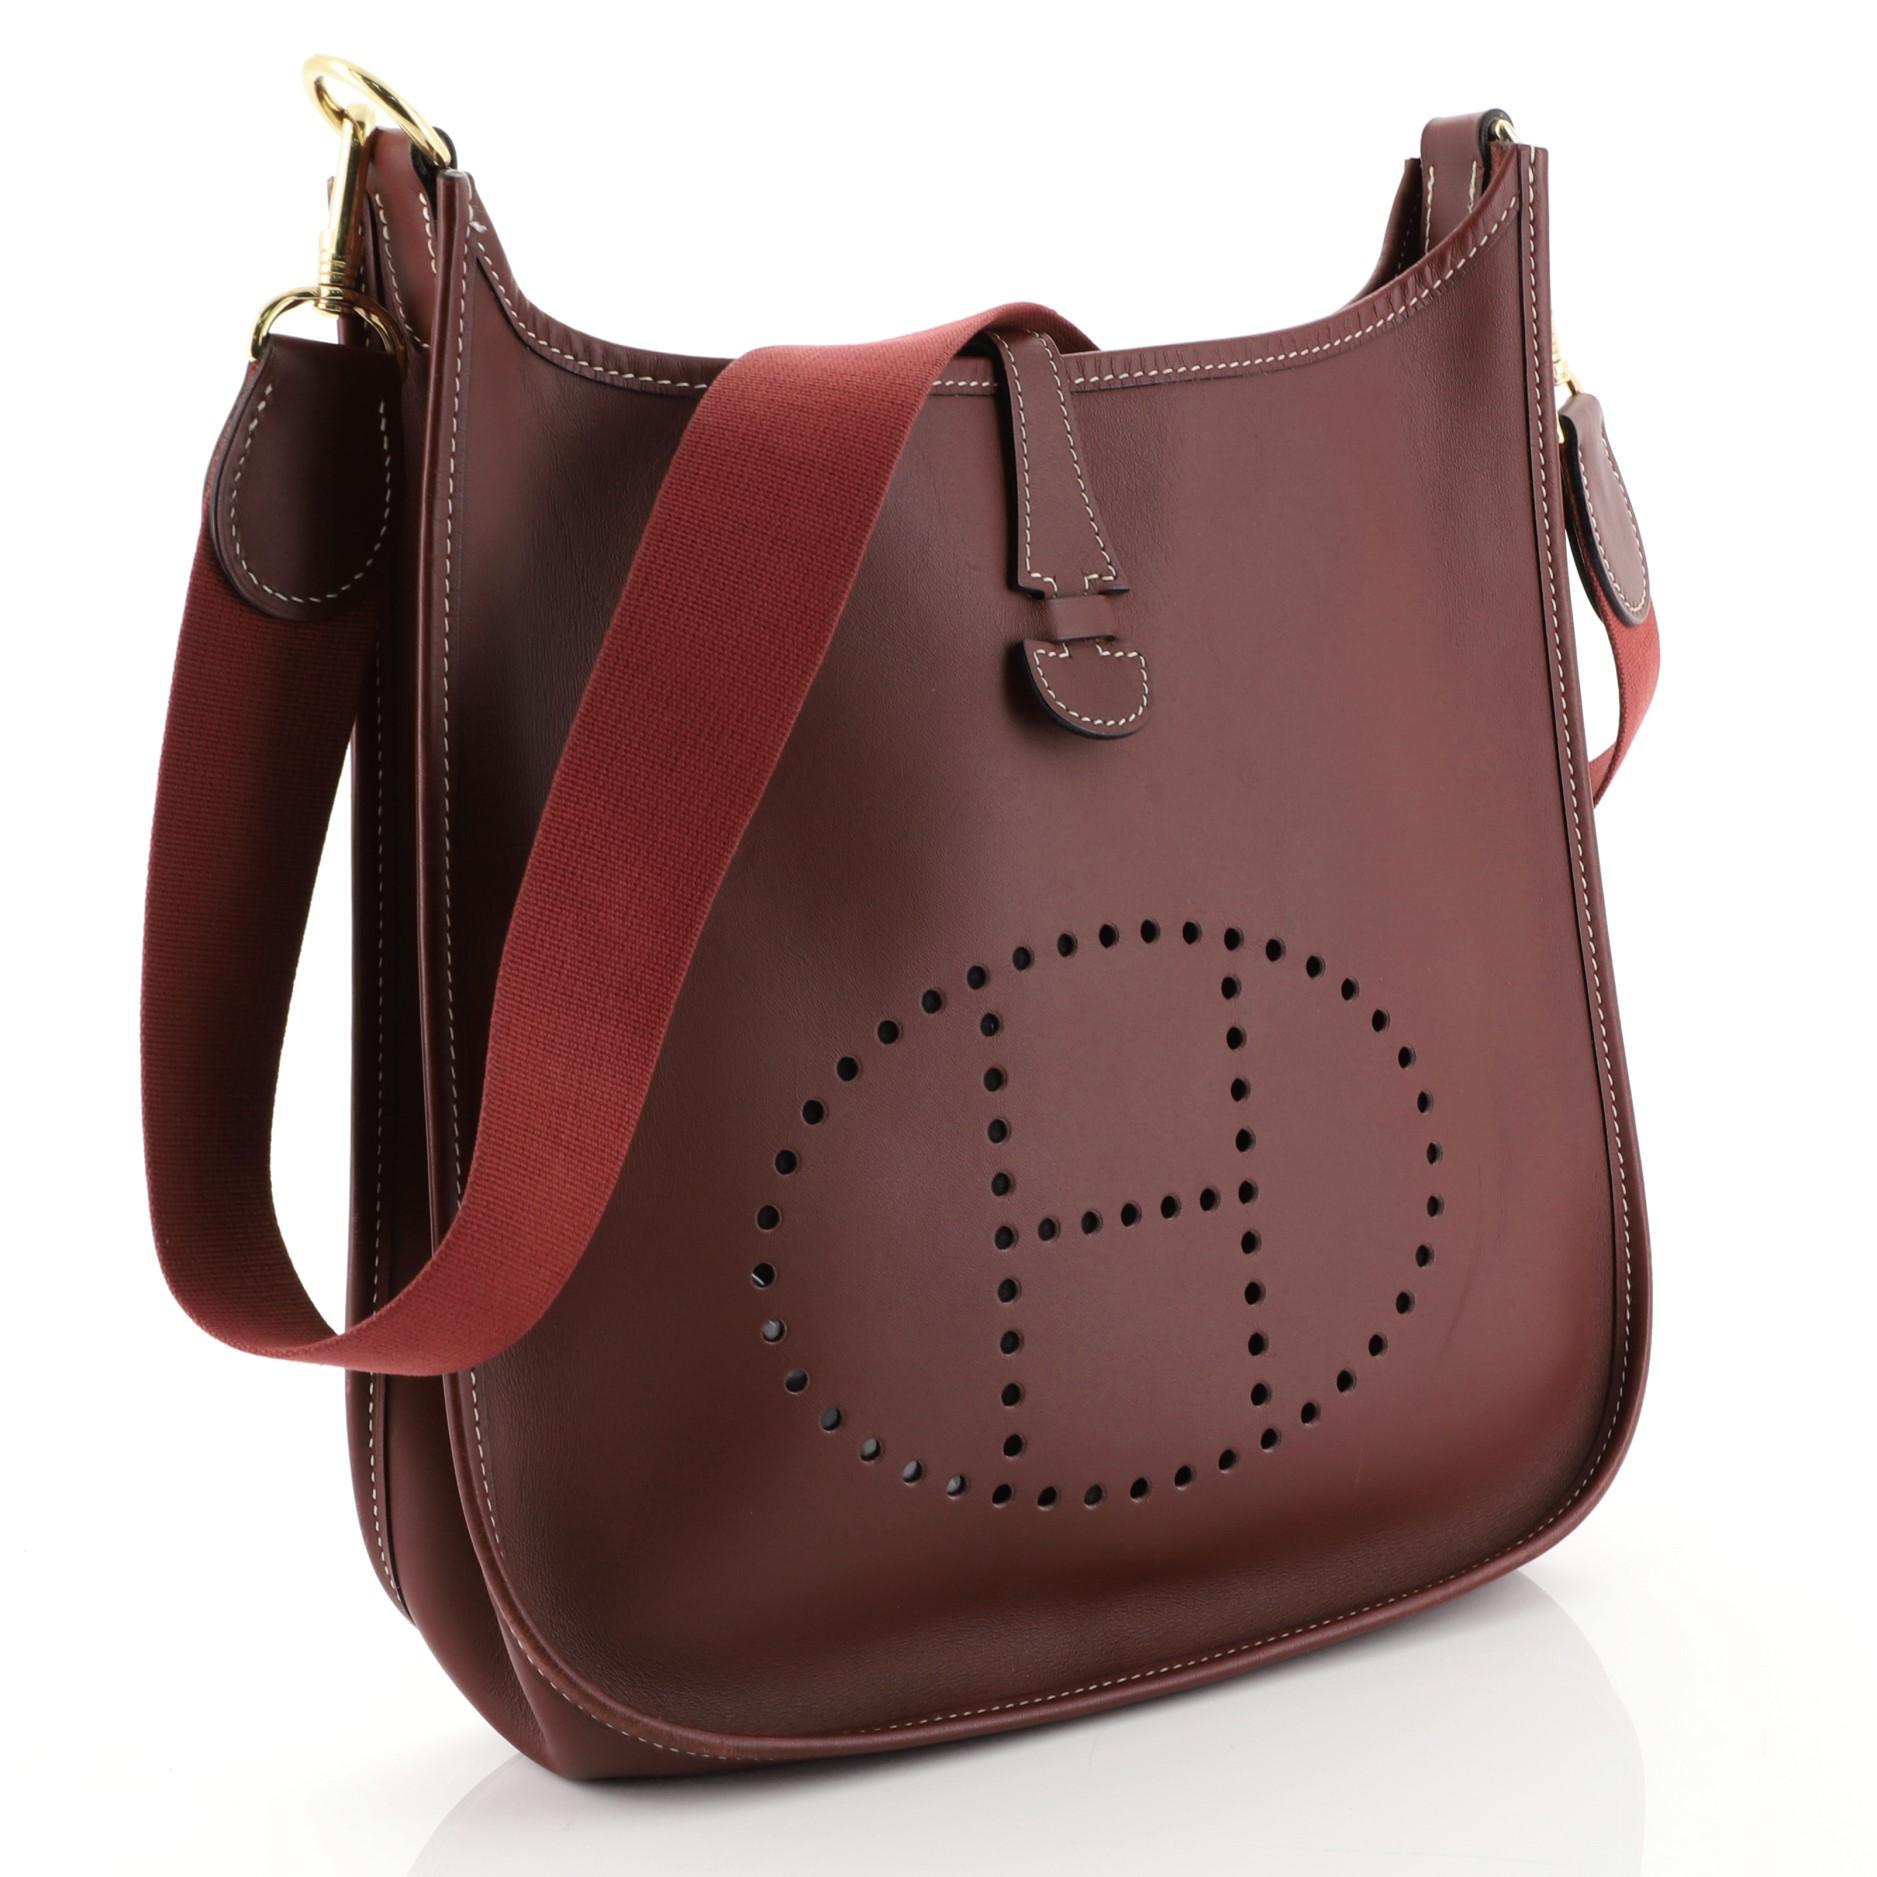 This Hermes Evelyne Crossbody Gen I Chamonix PM, crafted from Rouge H red Chamonix leather, features a signature perforated H design at the front, adjustable textile shoulder strap and gold-tone hardware. It opens to a red raw leather interior. Date